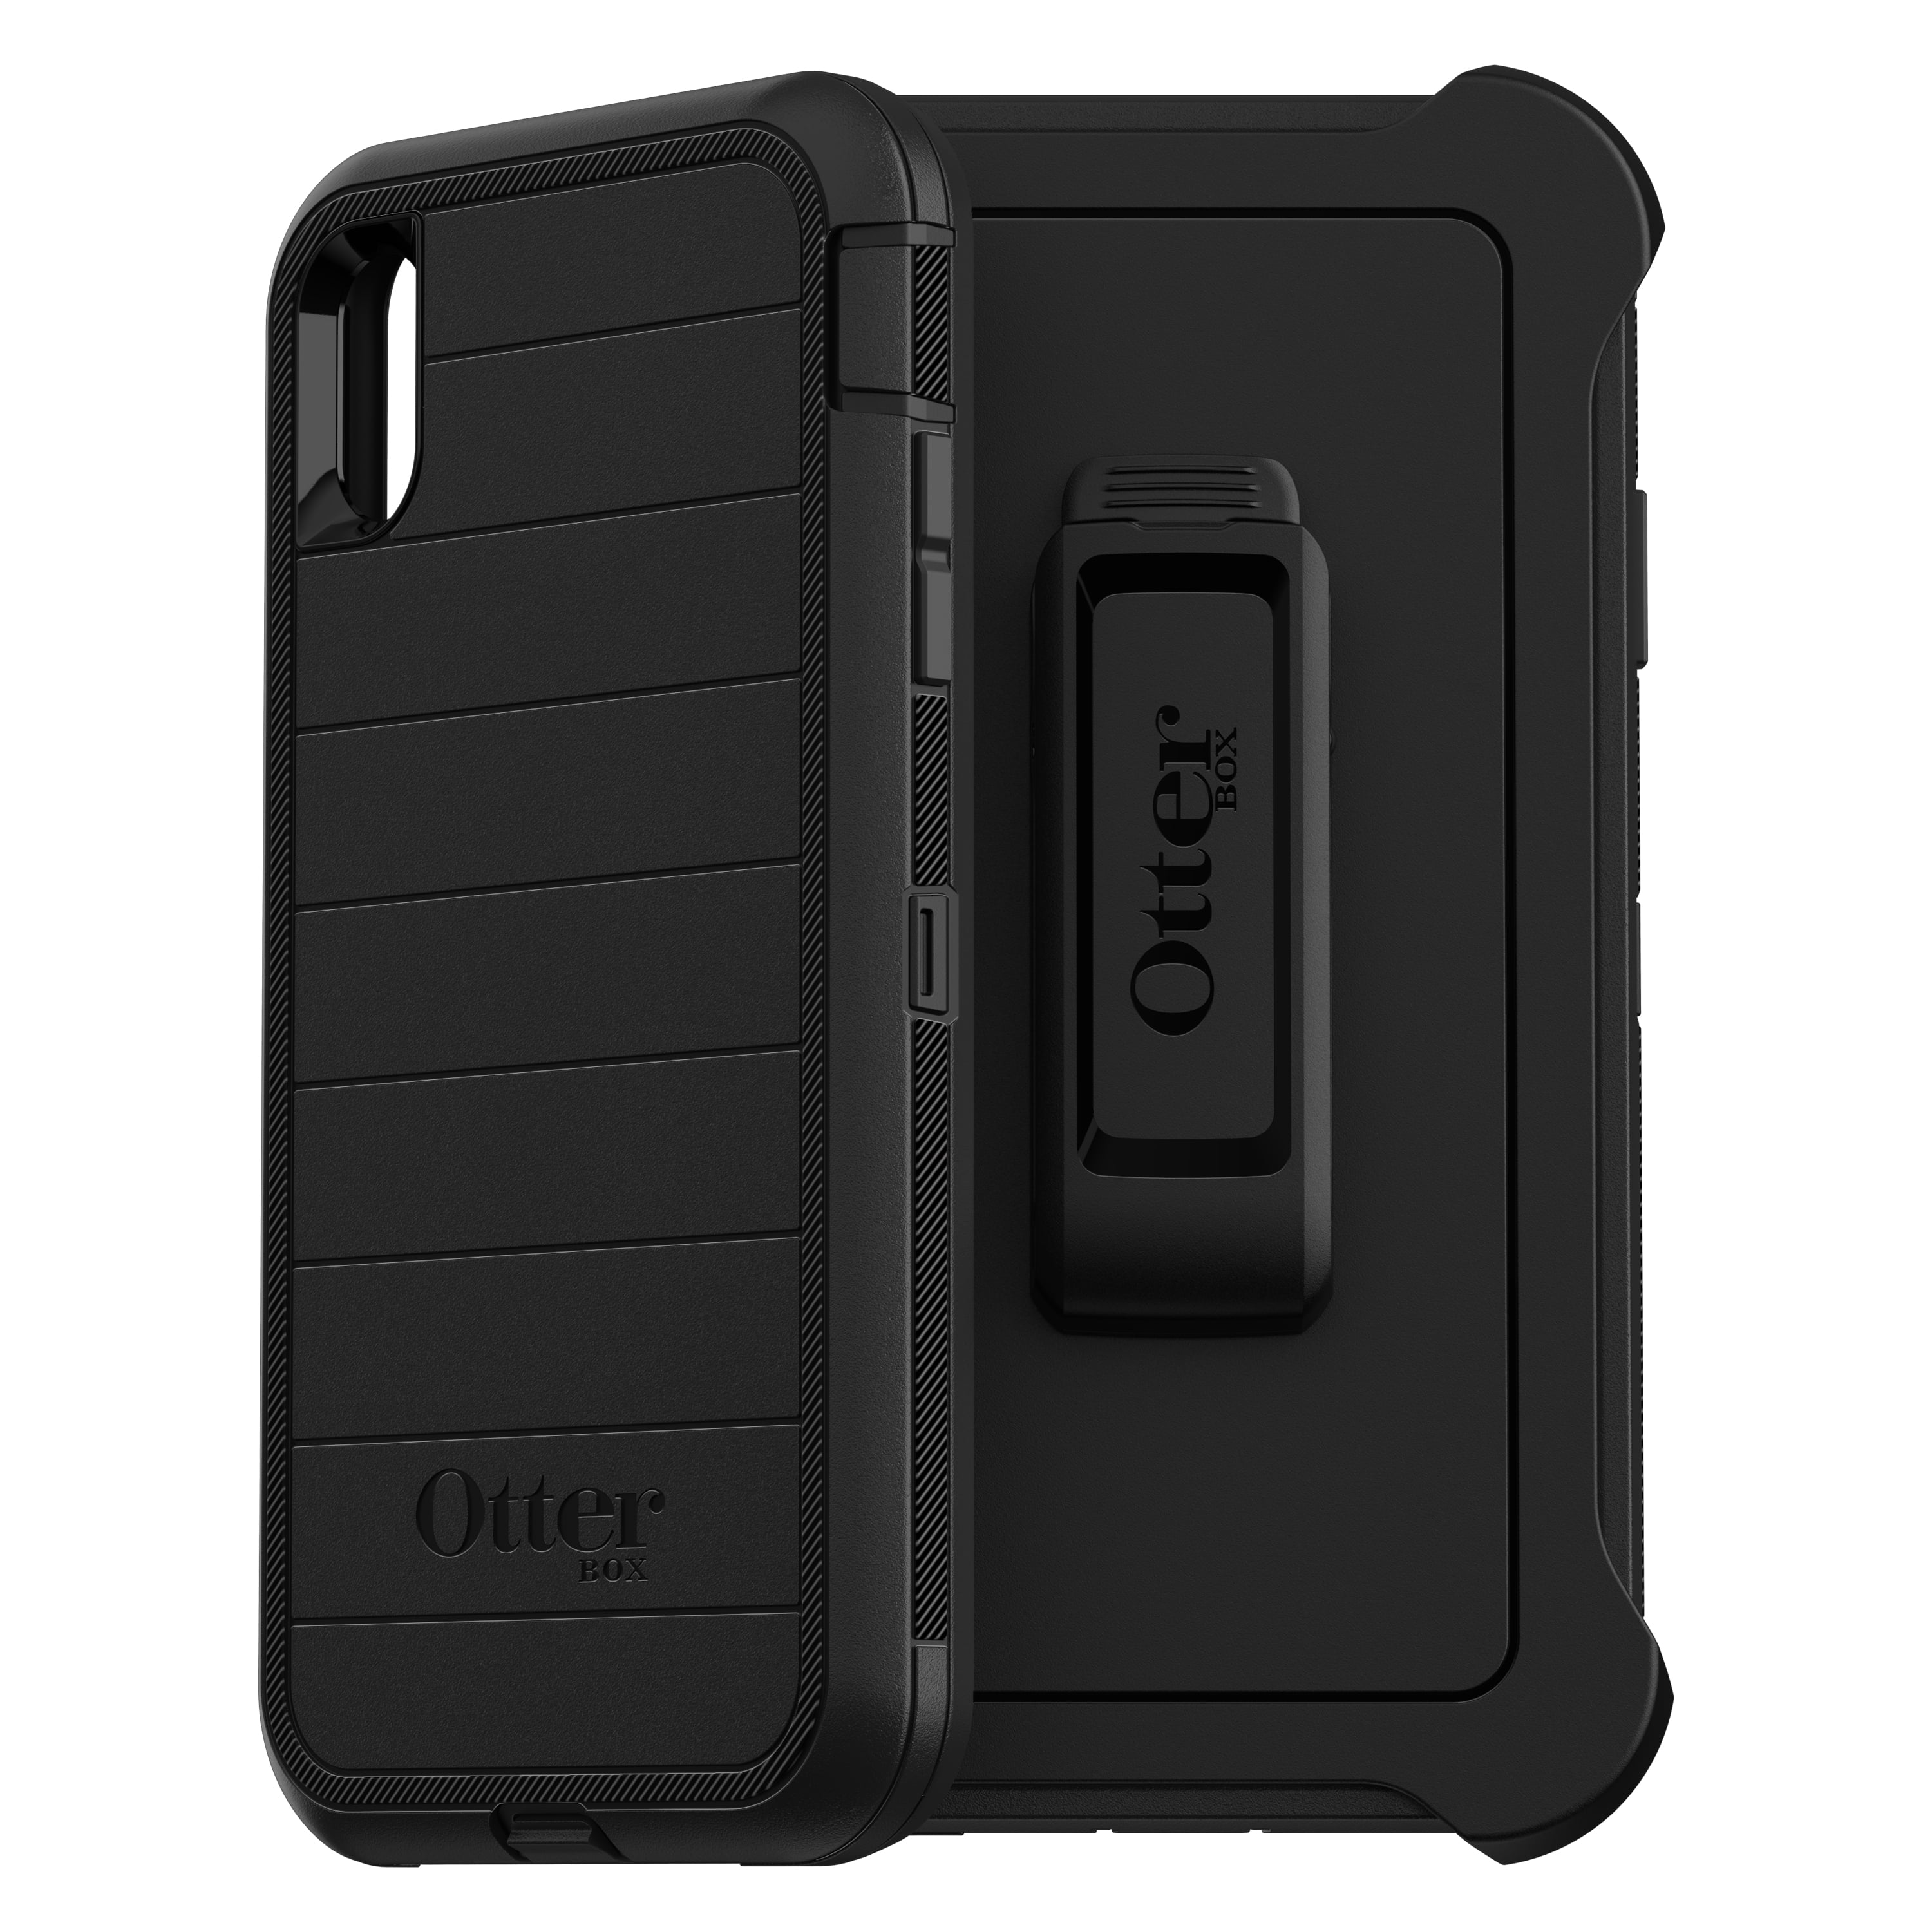 OtterBox Defender Series Pro Phone Case for Apple iPhone Xs Max - Black